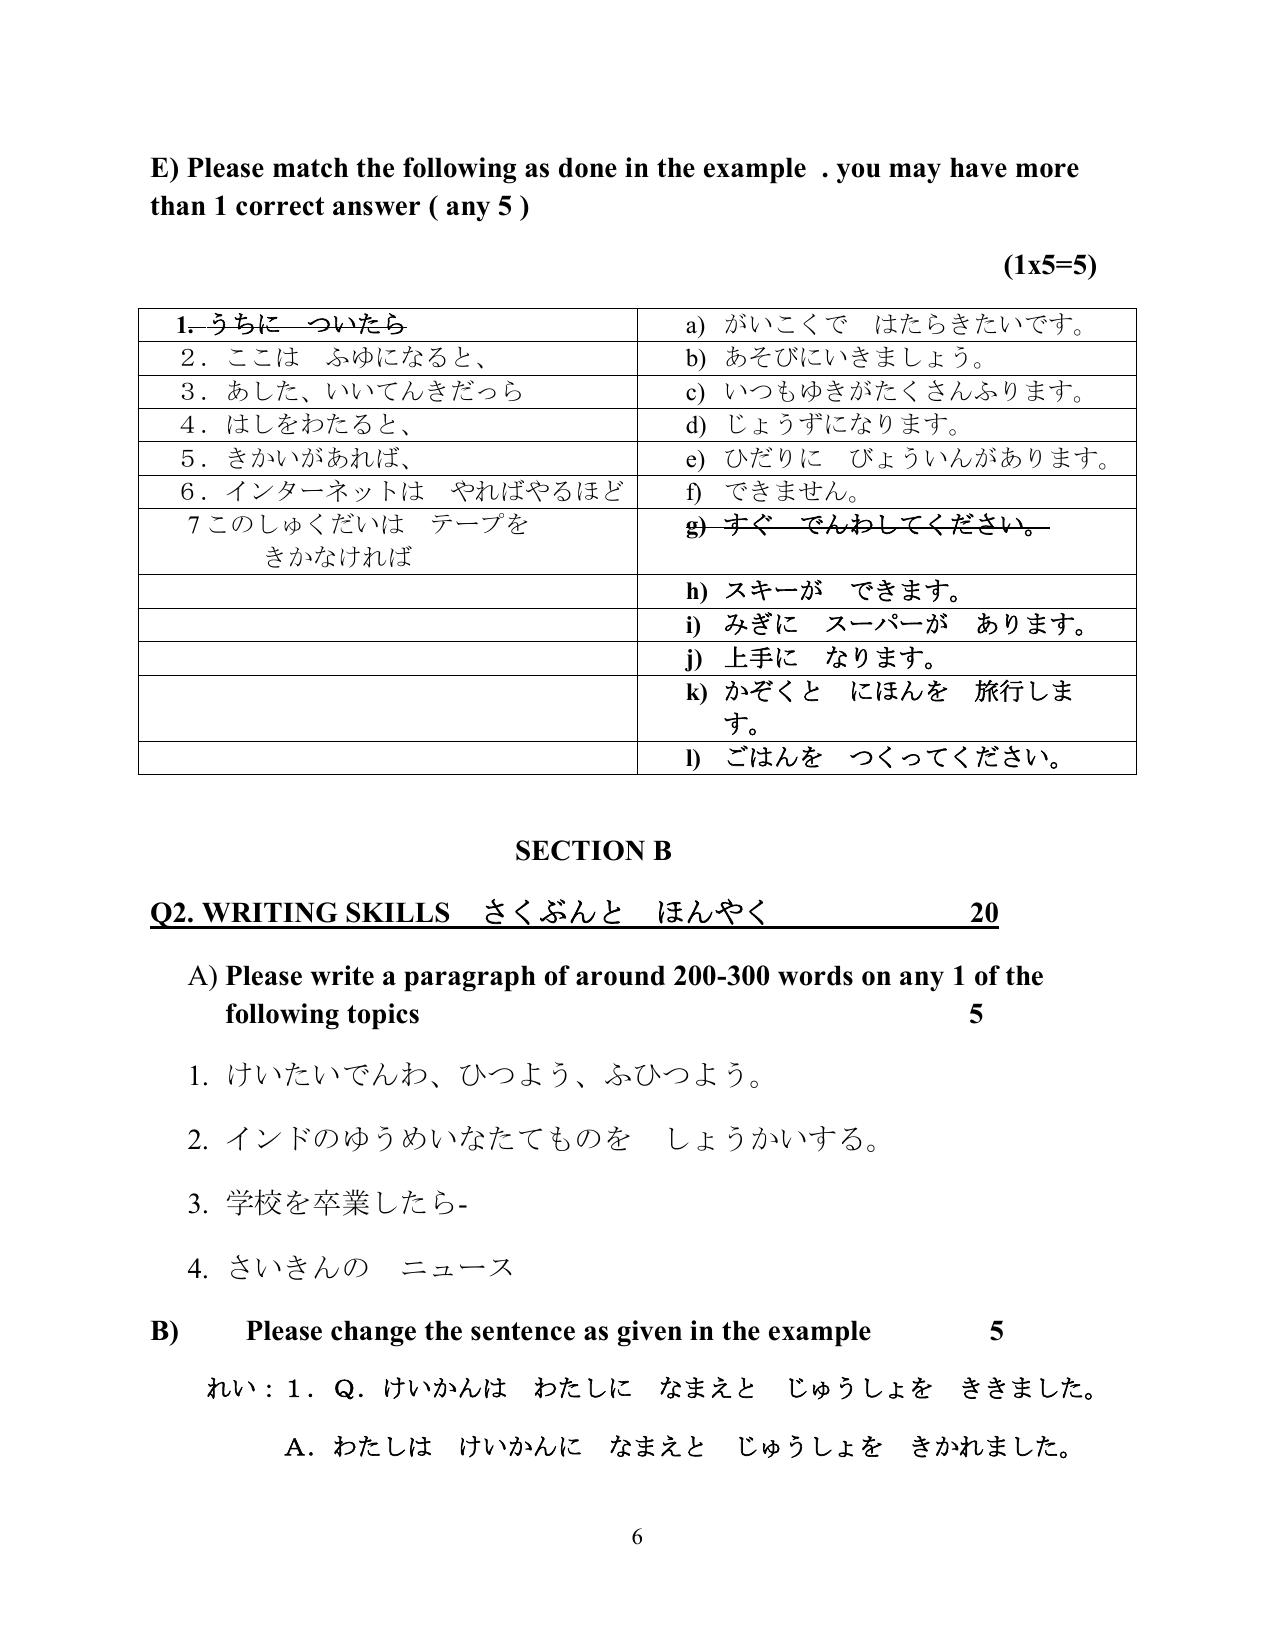 CBSE Class 12 Japanese -Sample Paper 2019-20 - Page 6